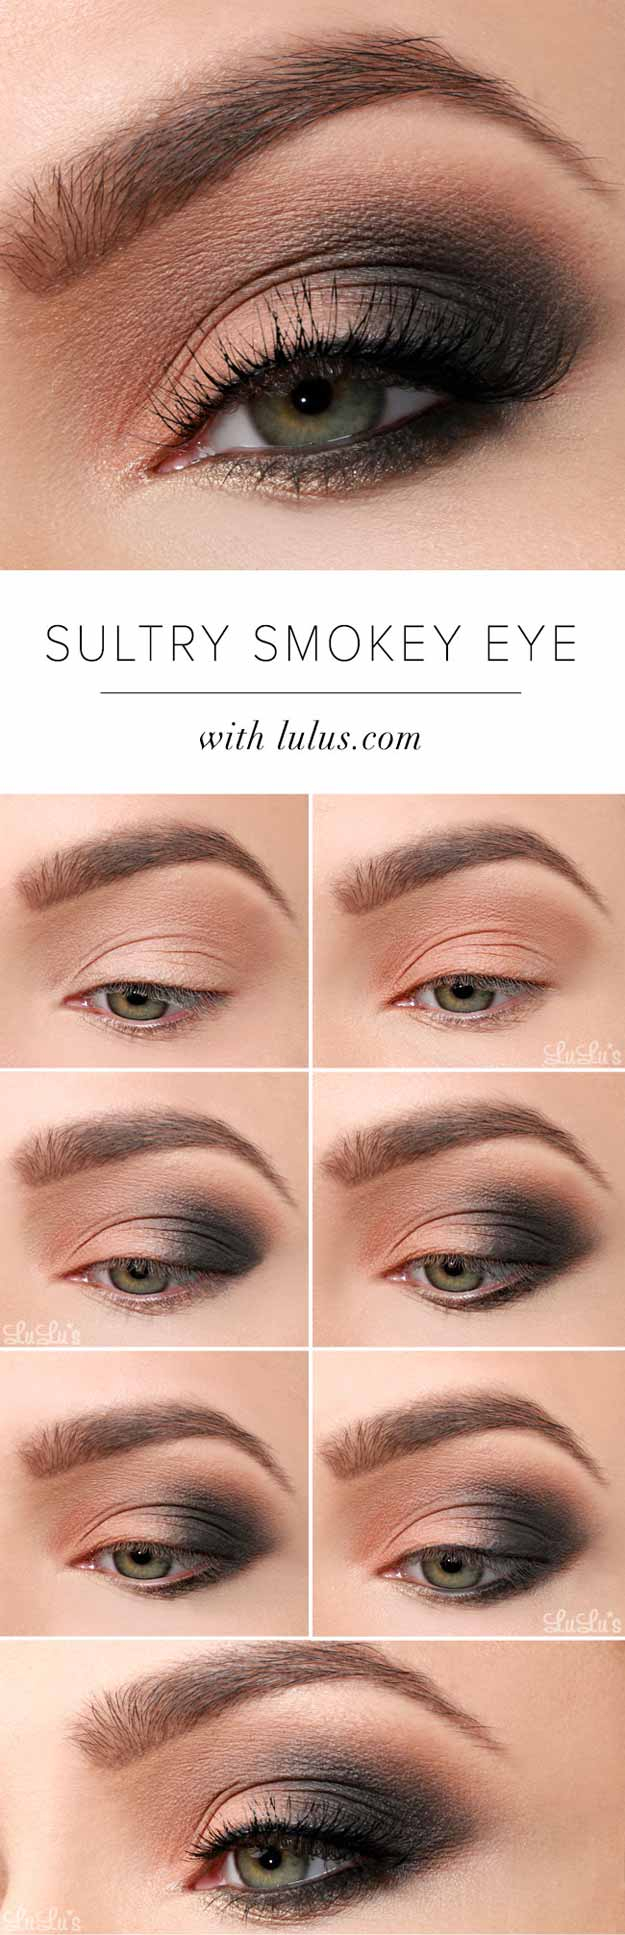 Eye Makeup Tips For Green Eyes And Brown Hair 35 Wedding Makeup For Blue Eyes The Goddess